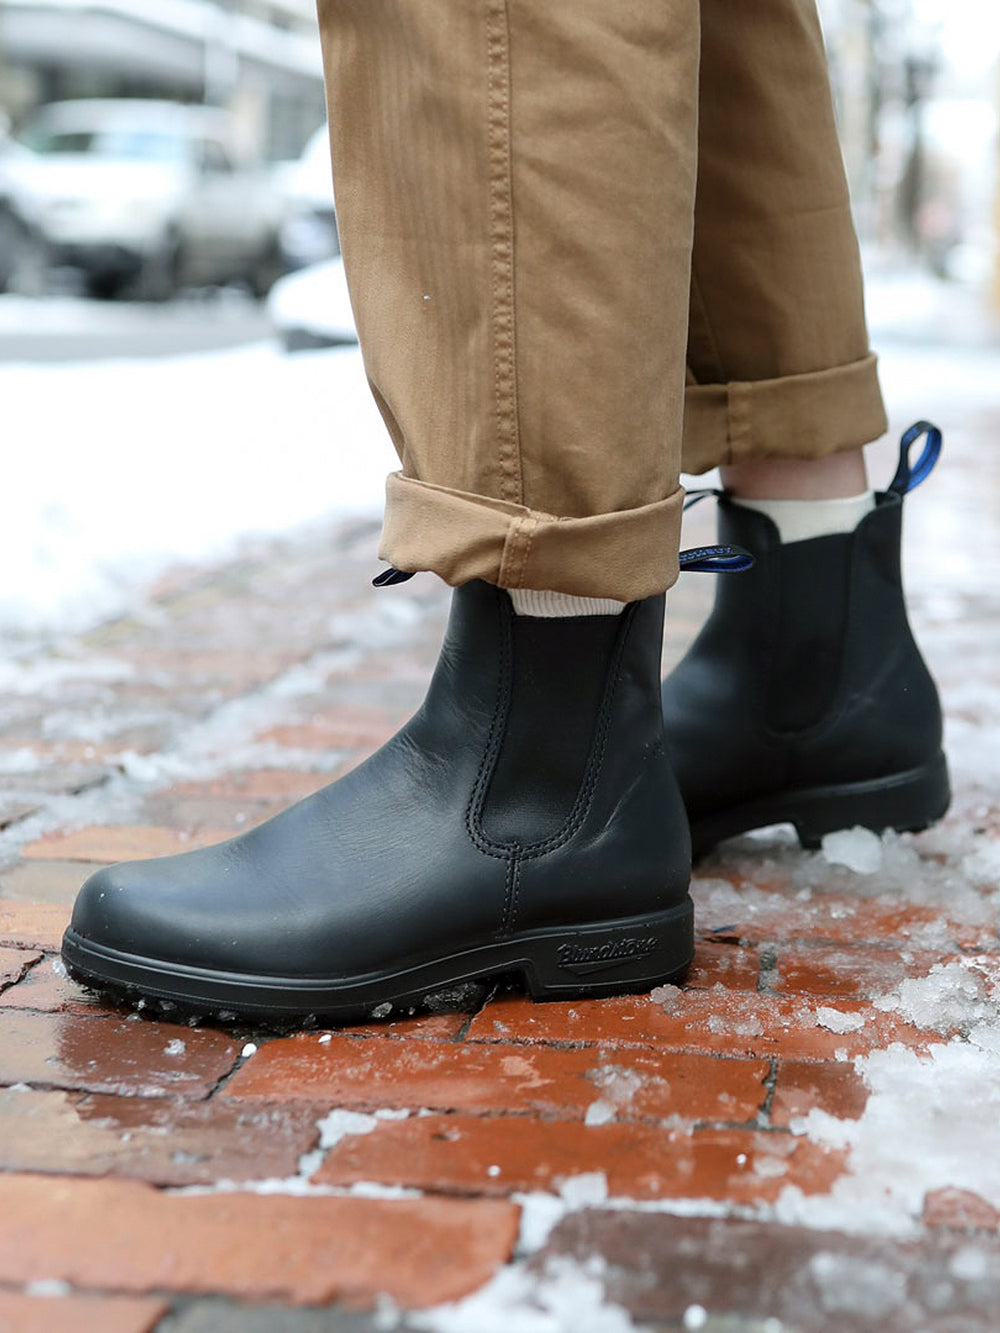 MENS BLUNDSTONE WINTER THERMAL CLASS BLACK BOOT